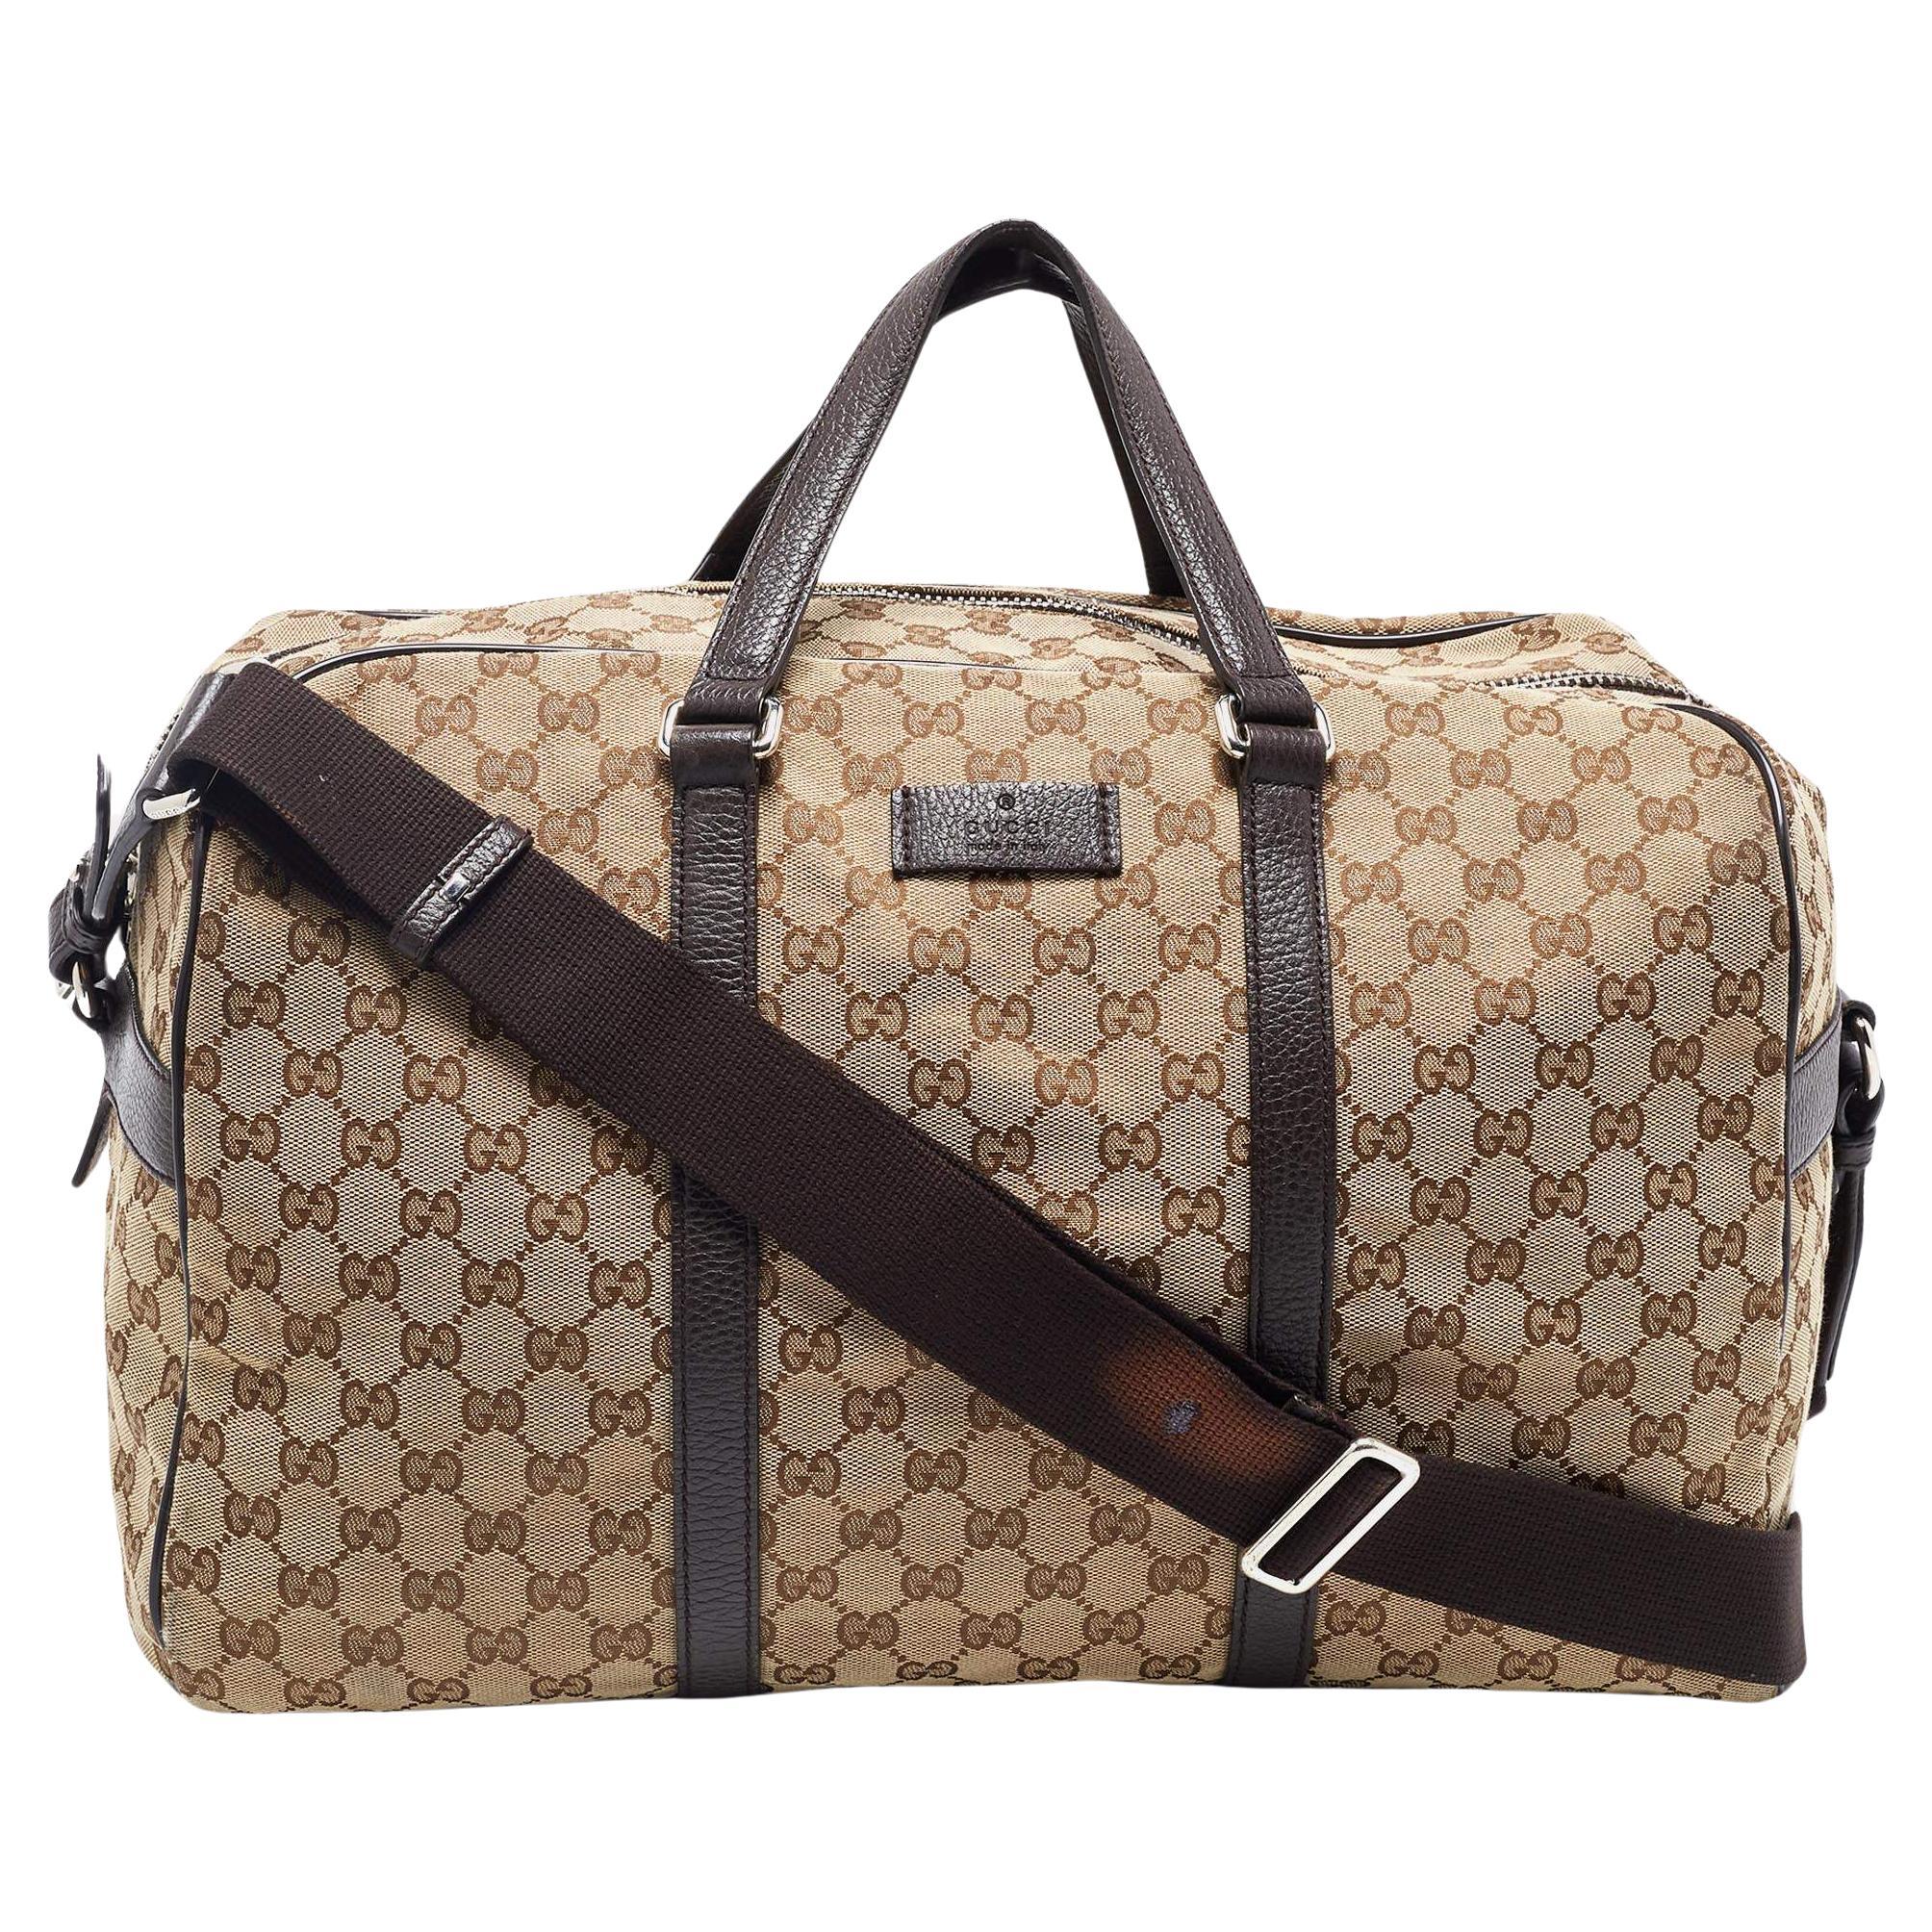 Gucci Brown/Beige GG Canvas and Leather Duffel Weekender Bag